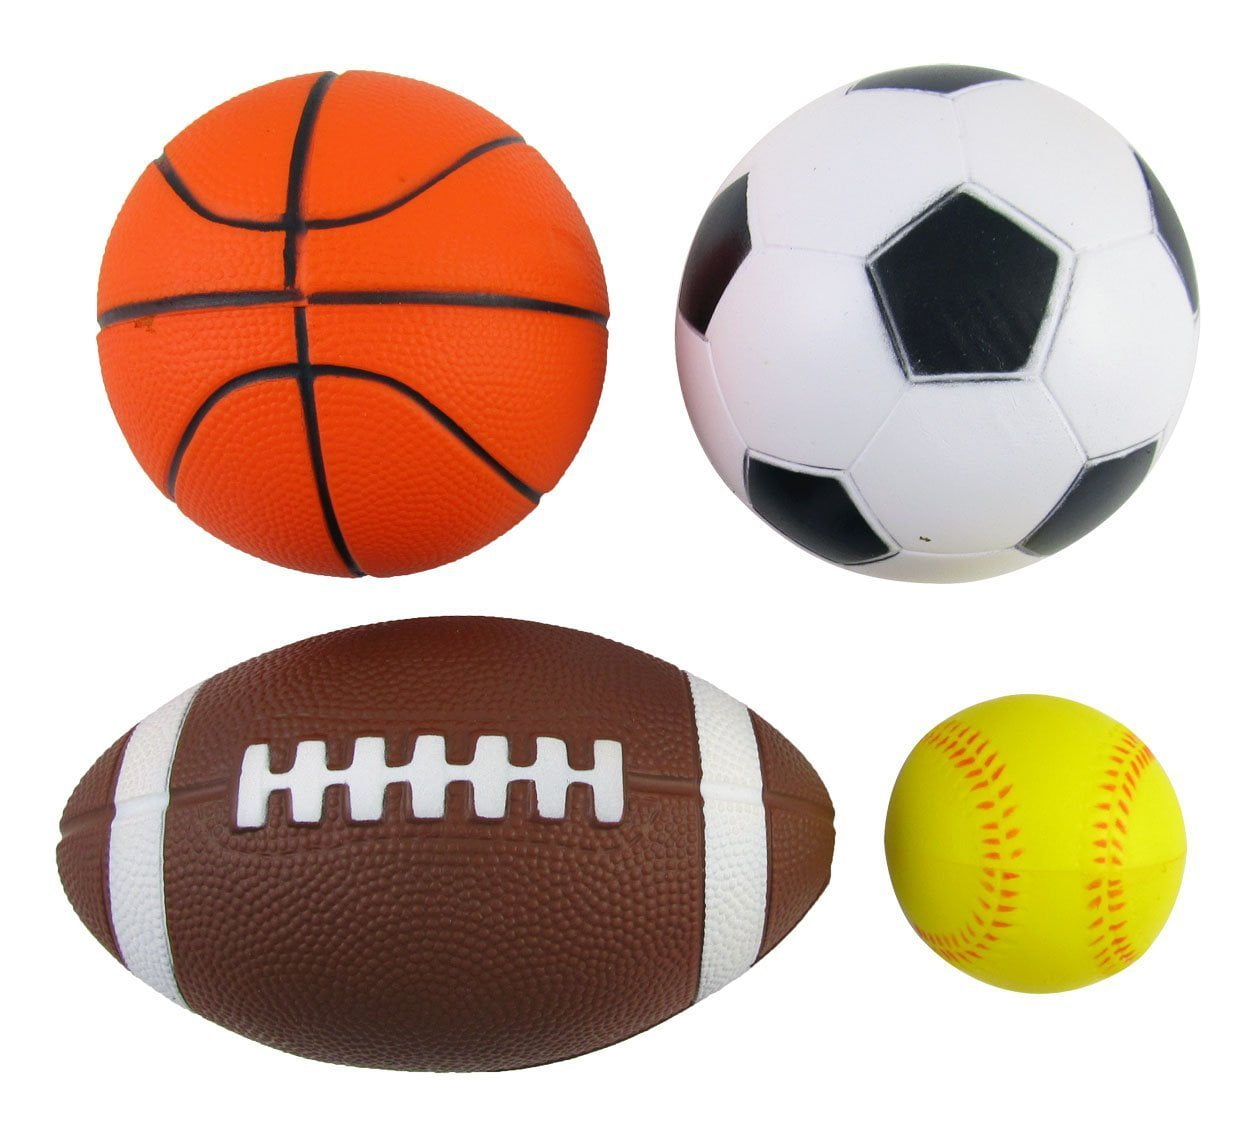 12 ASSORTED COLOR SOCCER BALL SQUISHY 9 INCH TOY PVC toy sport game play child 